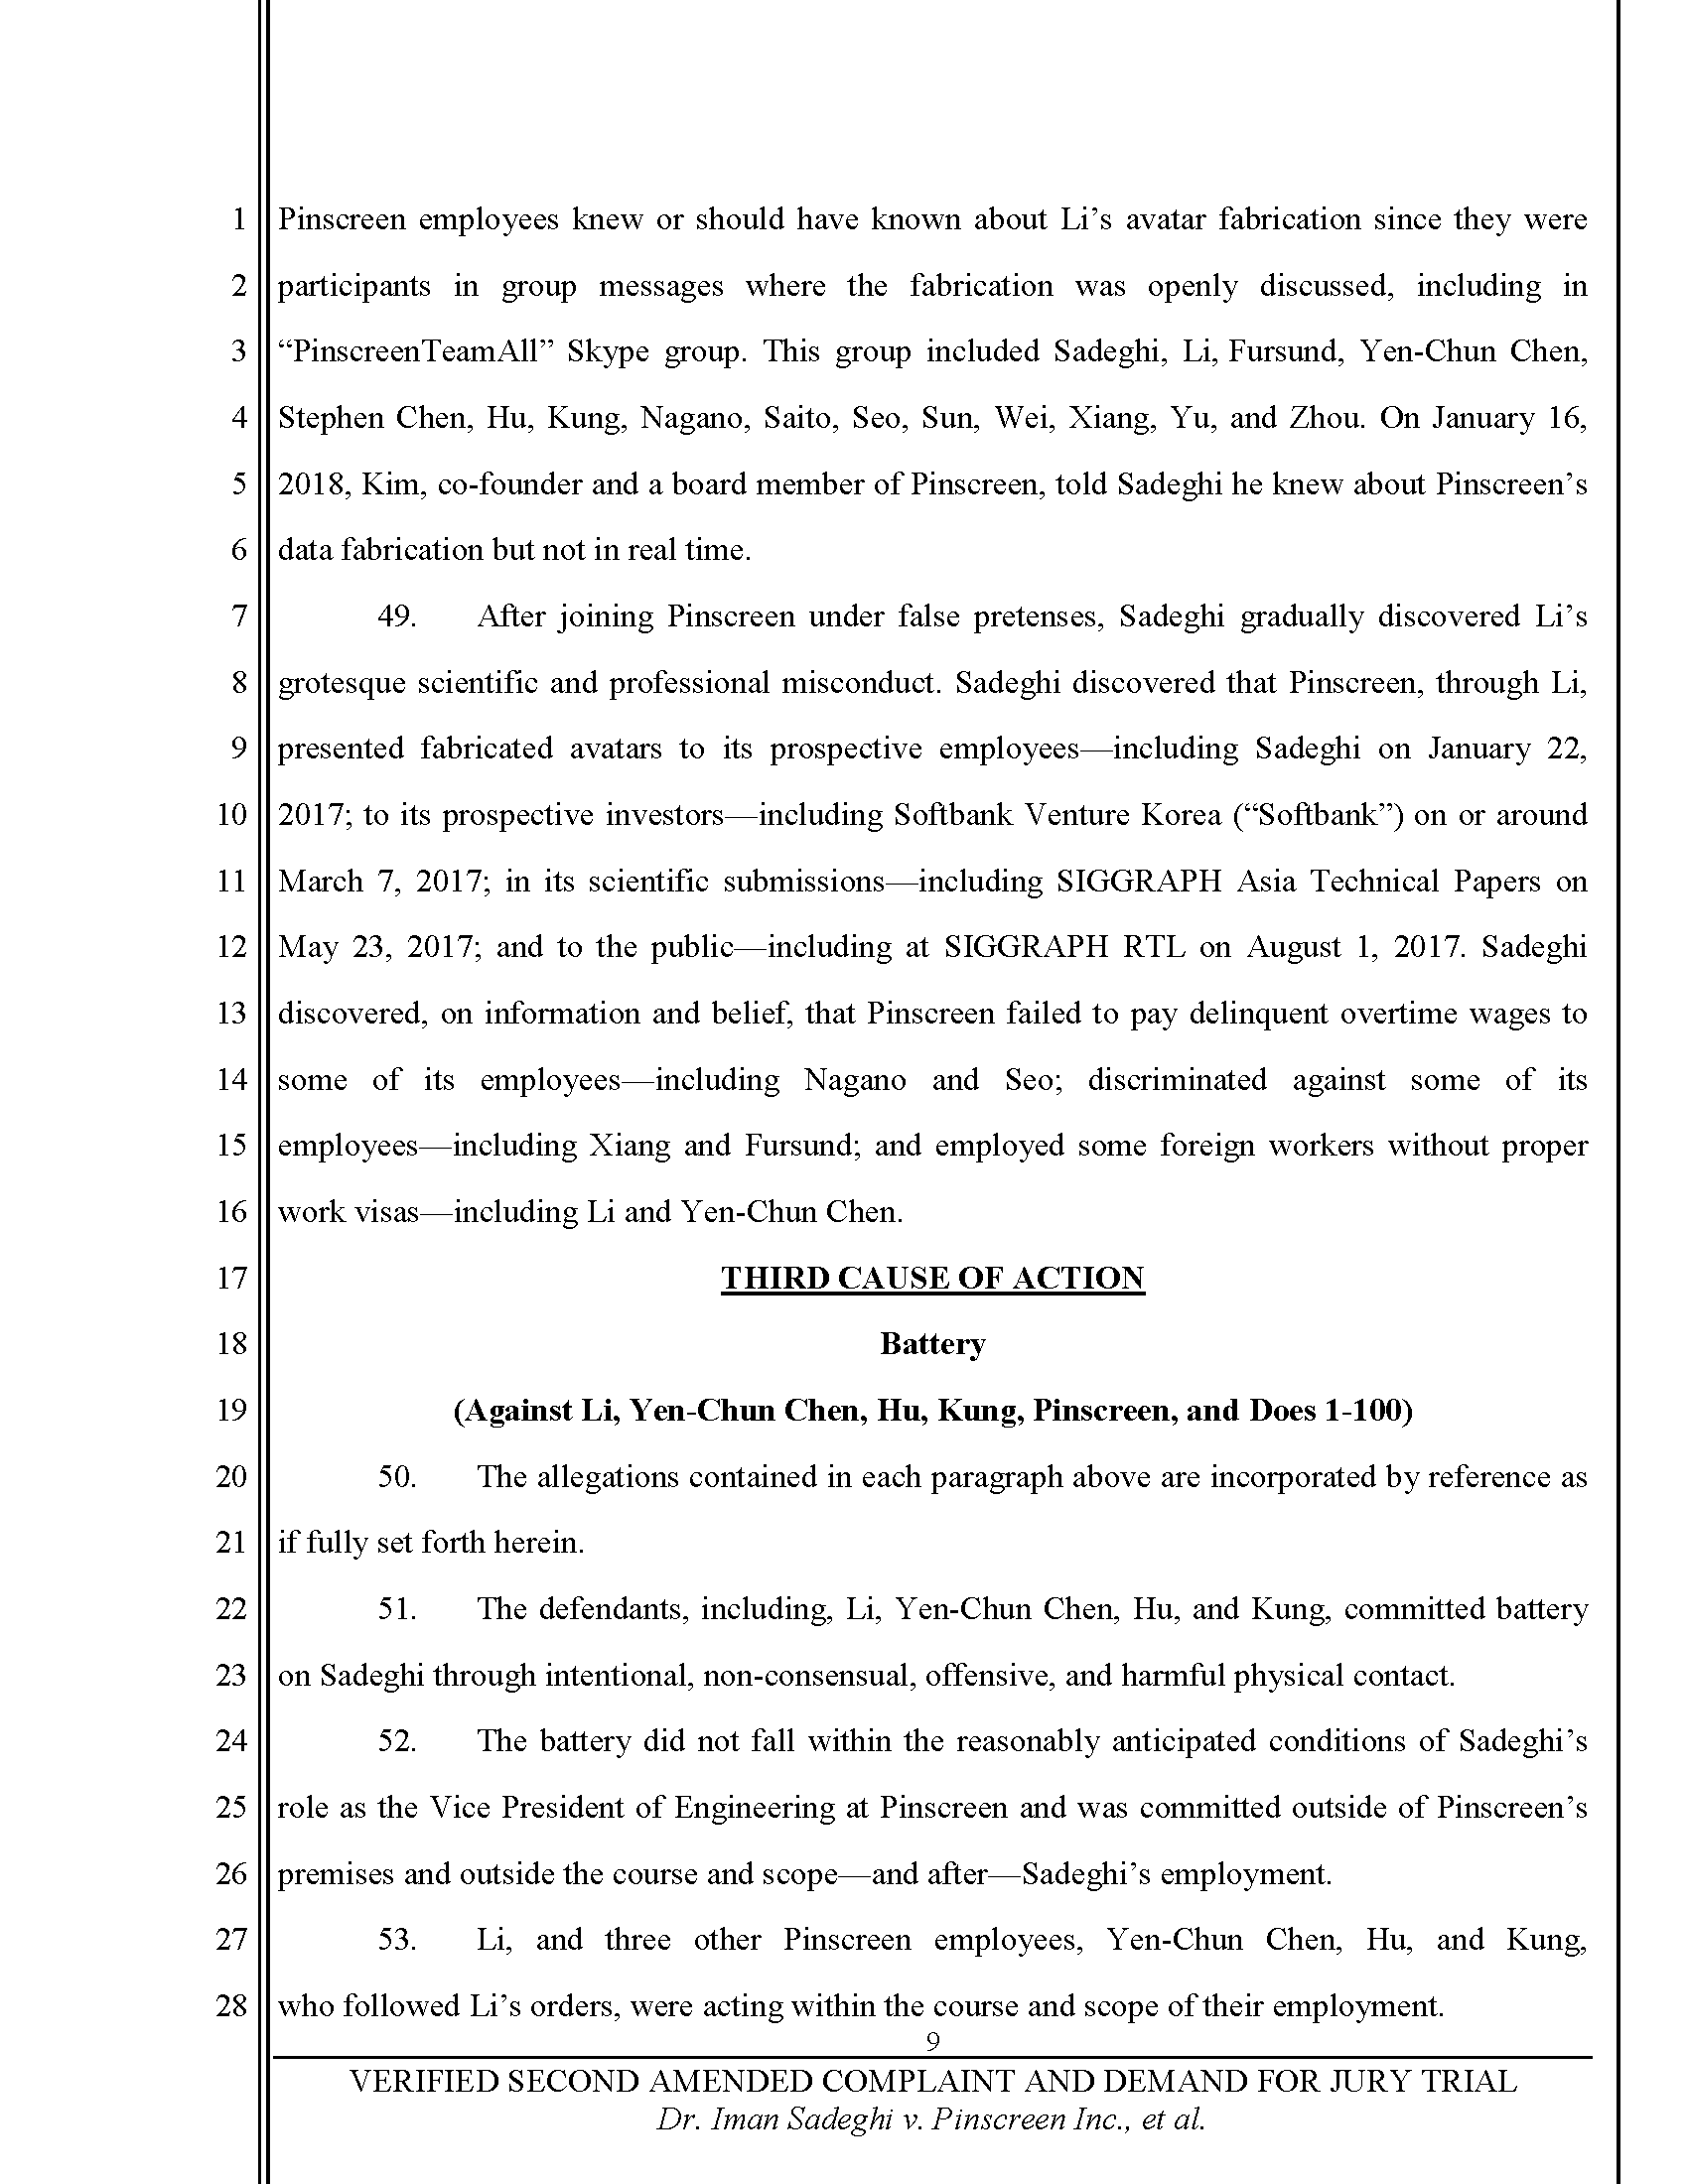 Second Amended Complaint (SAC) Page 10